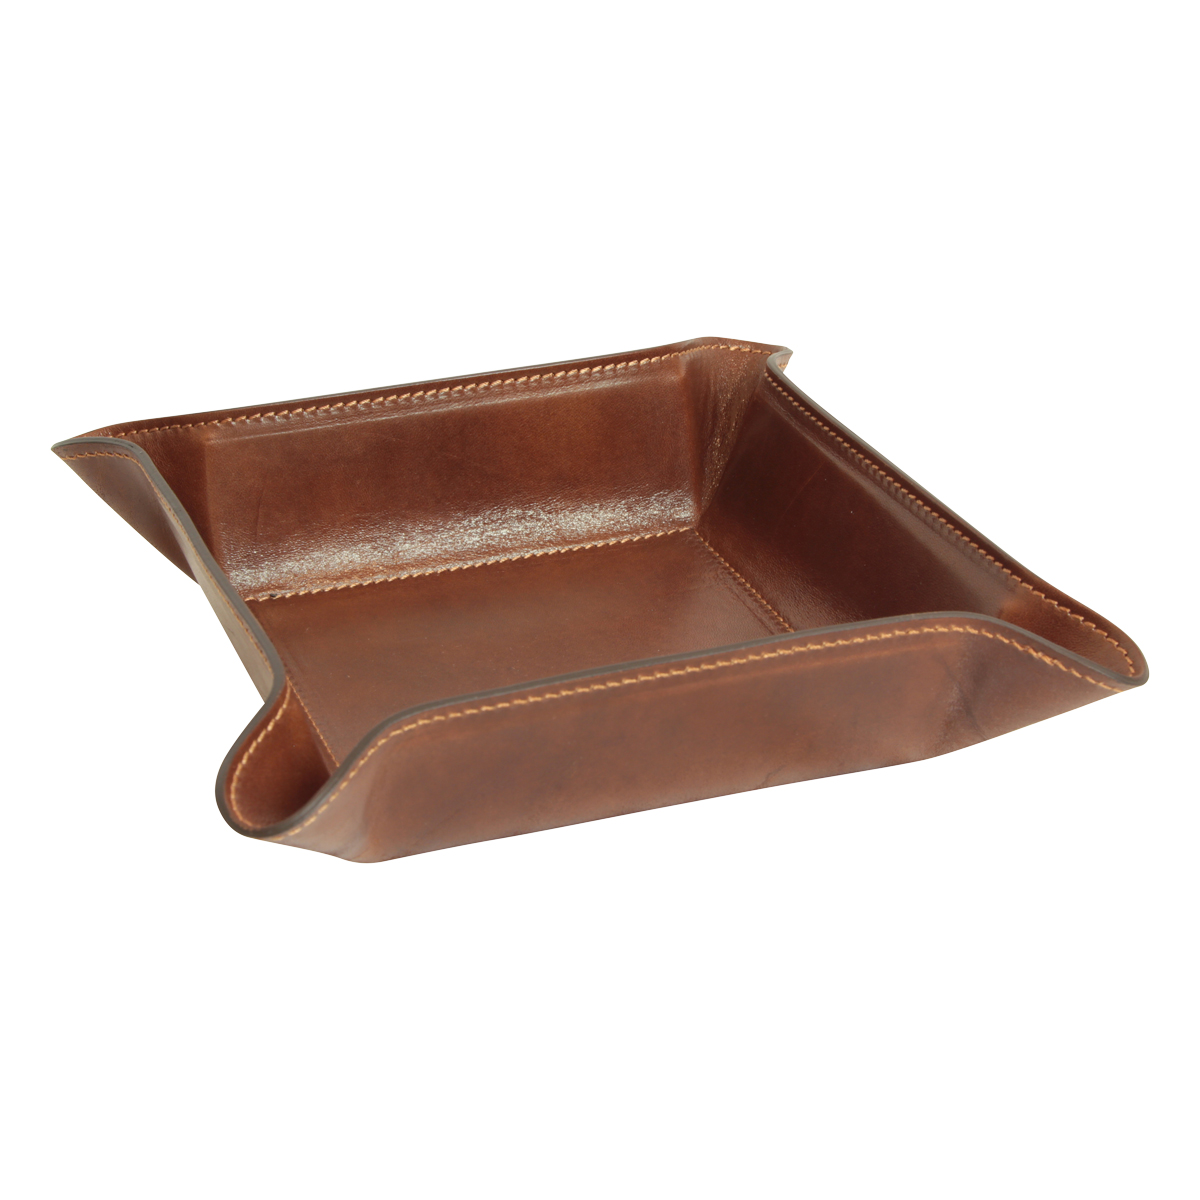 Leather Catchall Tray - Brown | 751005MA US | Old Angler Firenze